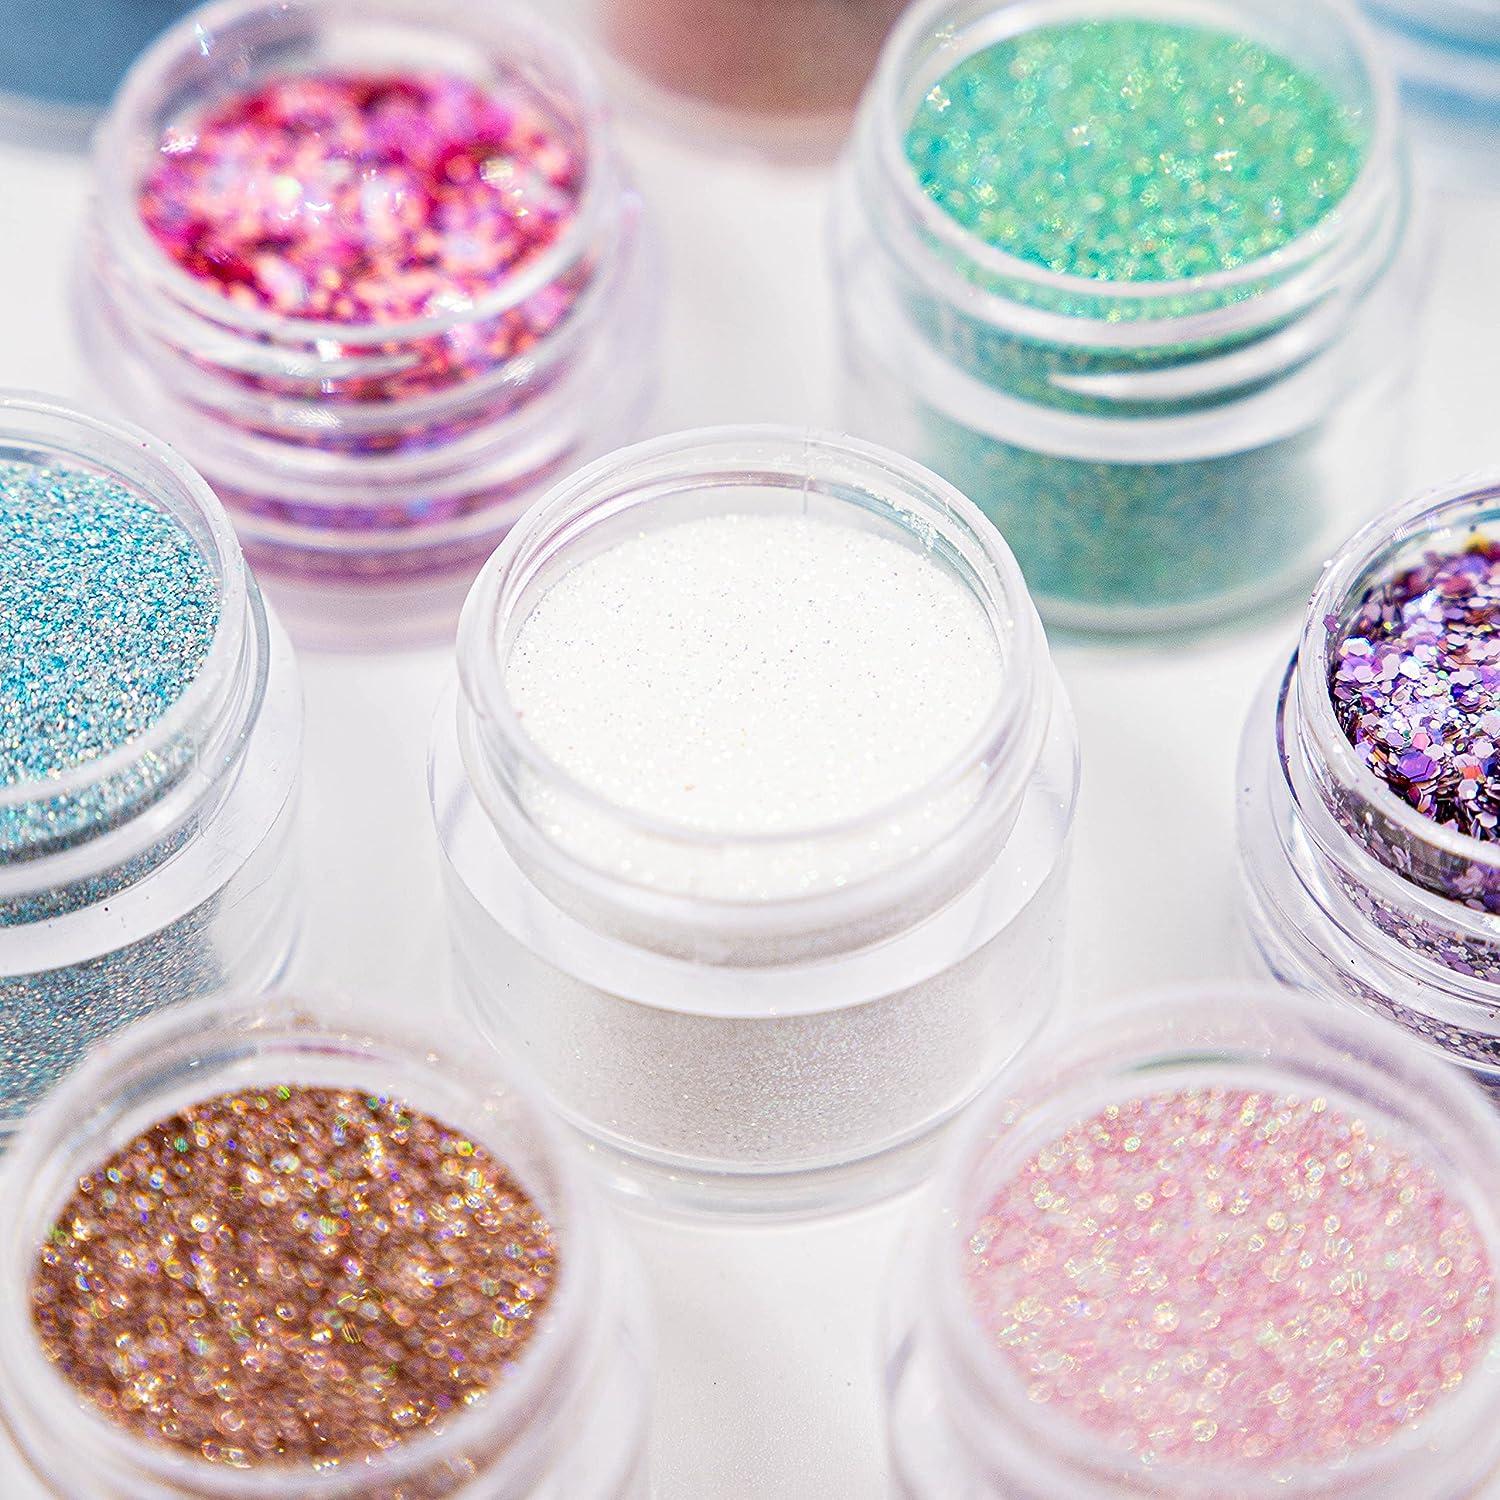 GLITTIES - ICY Mint - Cosmetic Grade Extra Fine (.006) Loose Glitter  Powder Safe for Skin! Perfect for Makeup, Body Tattoos, Face, Hair, Lips,  Soap, Lotion, Nail Art - (30 Gram Jar) 30 Gram Icy Mint